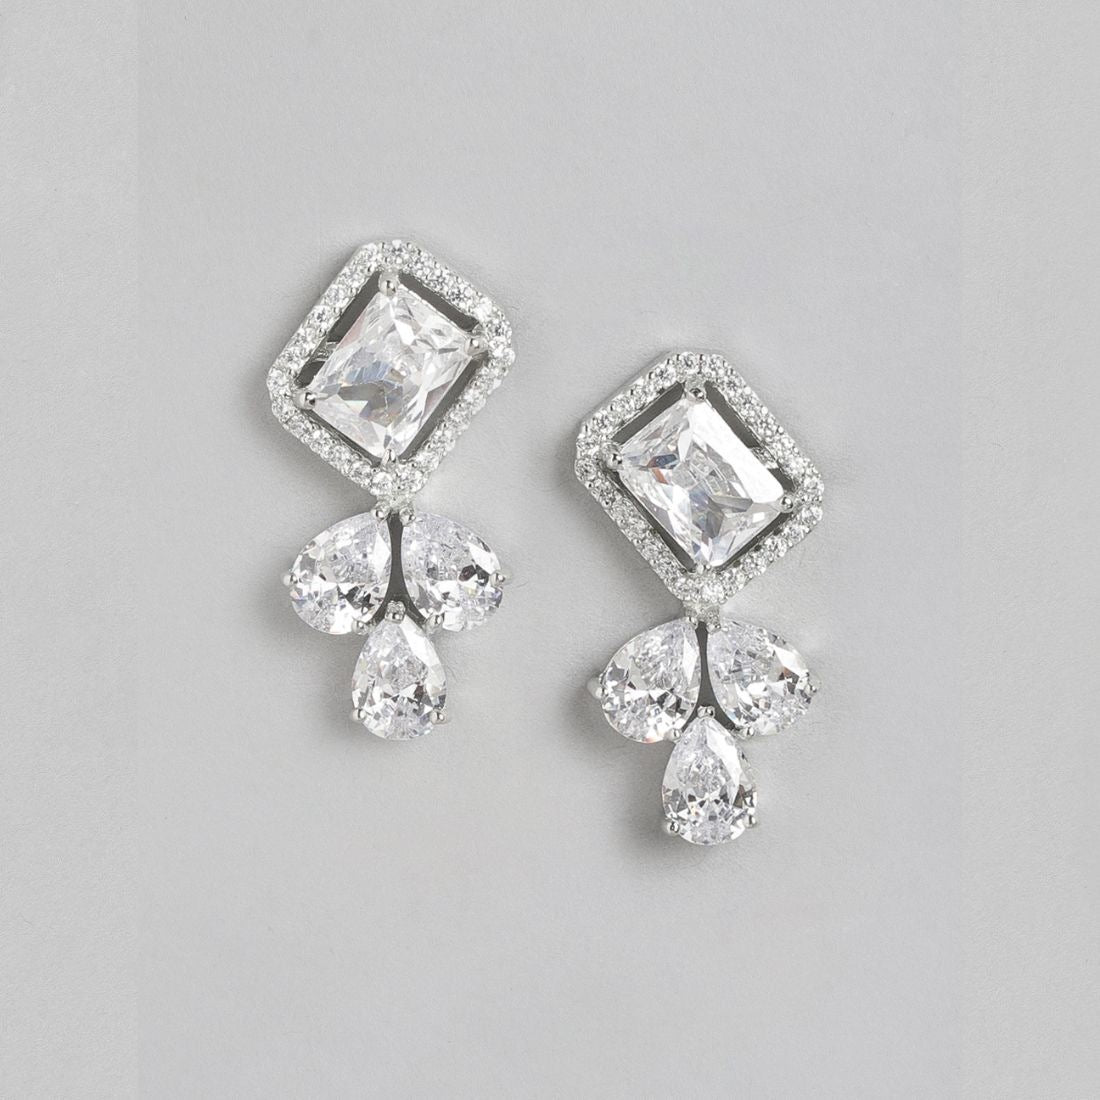 Radiant Brilliance Rhodium Plated 925 Sterling Silver Stud Earrings